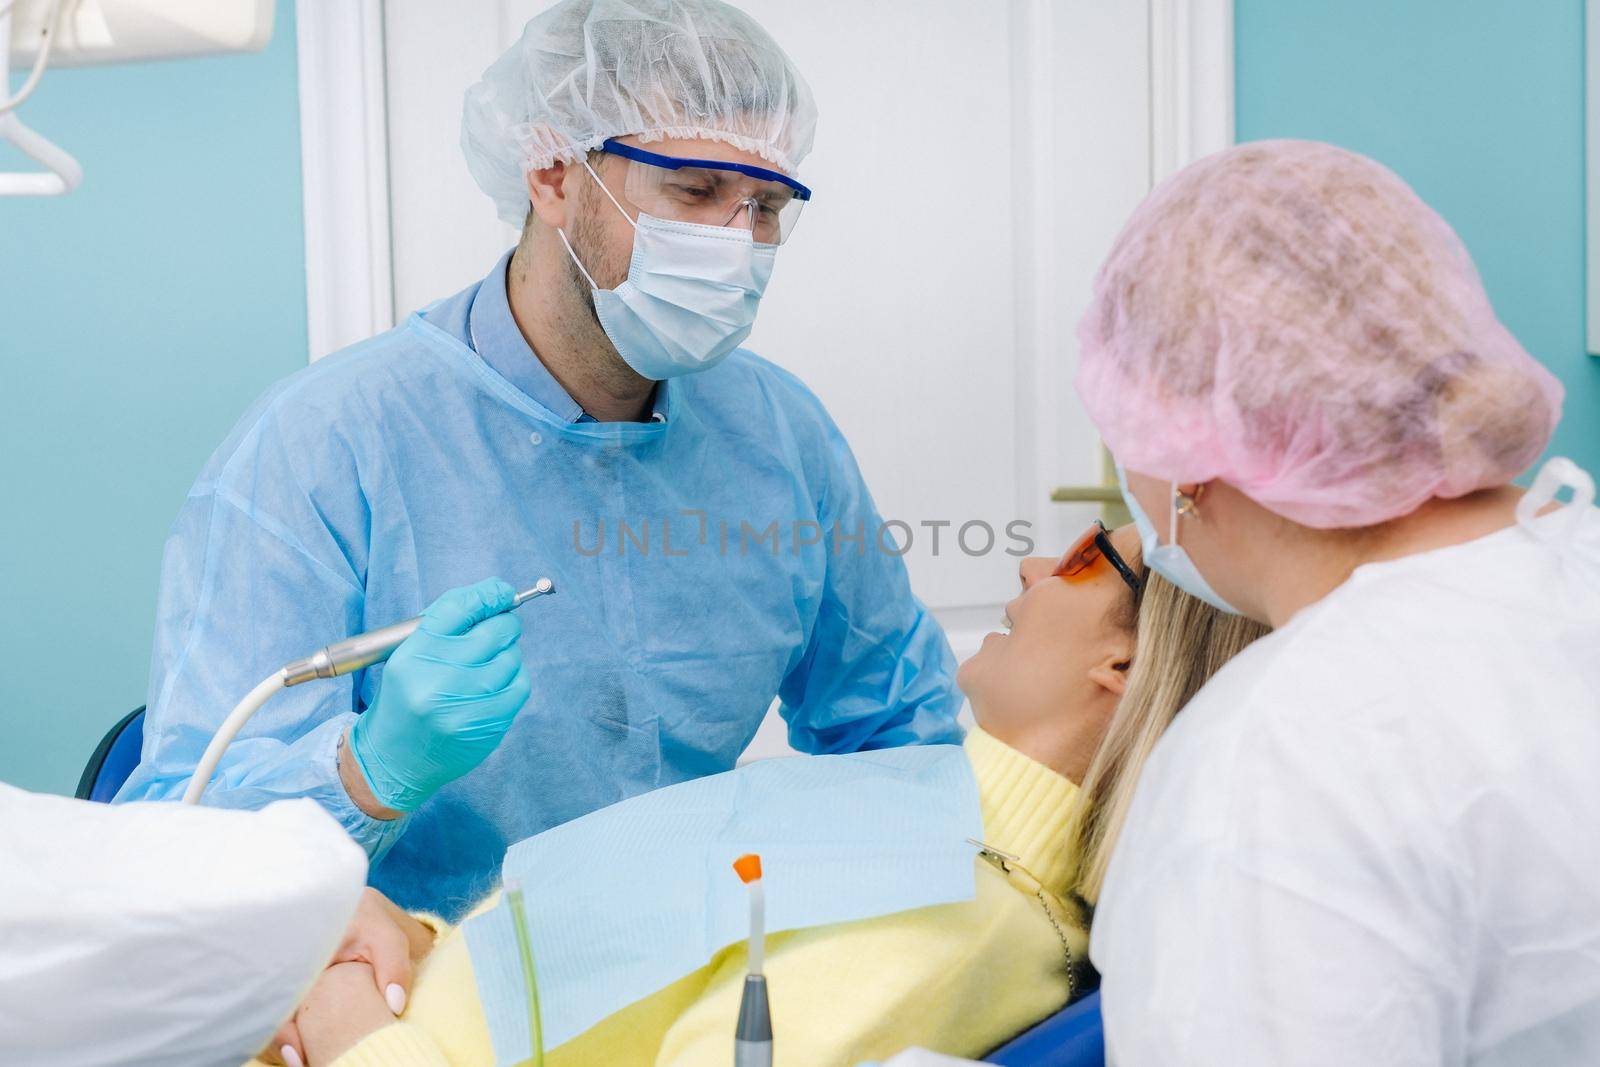 The patient smiles in the dentist's chair in a protective mask and instrument before treatment in the dental office.